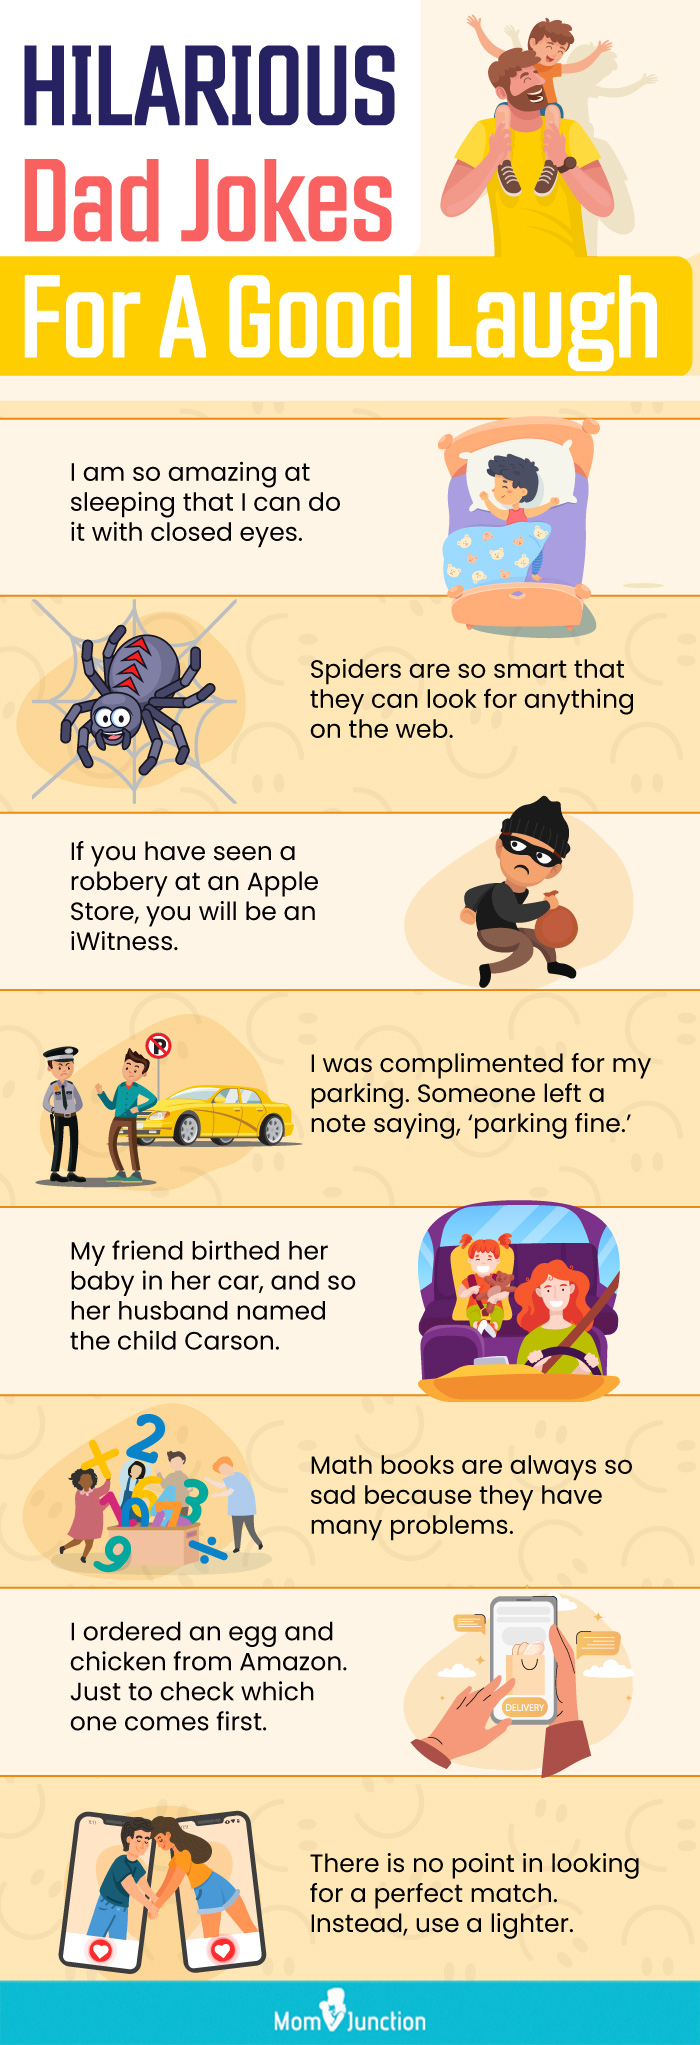 hilarious dad jokes for a good laugh (infographic)